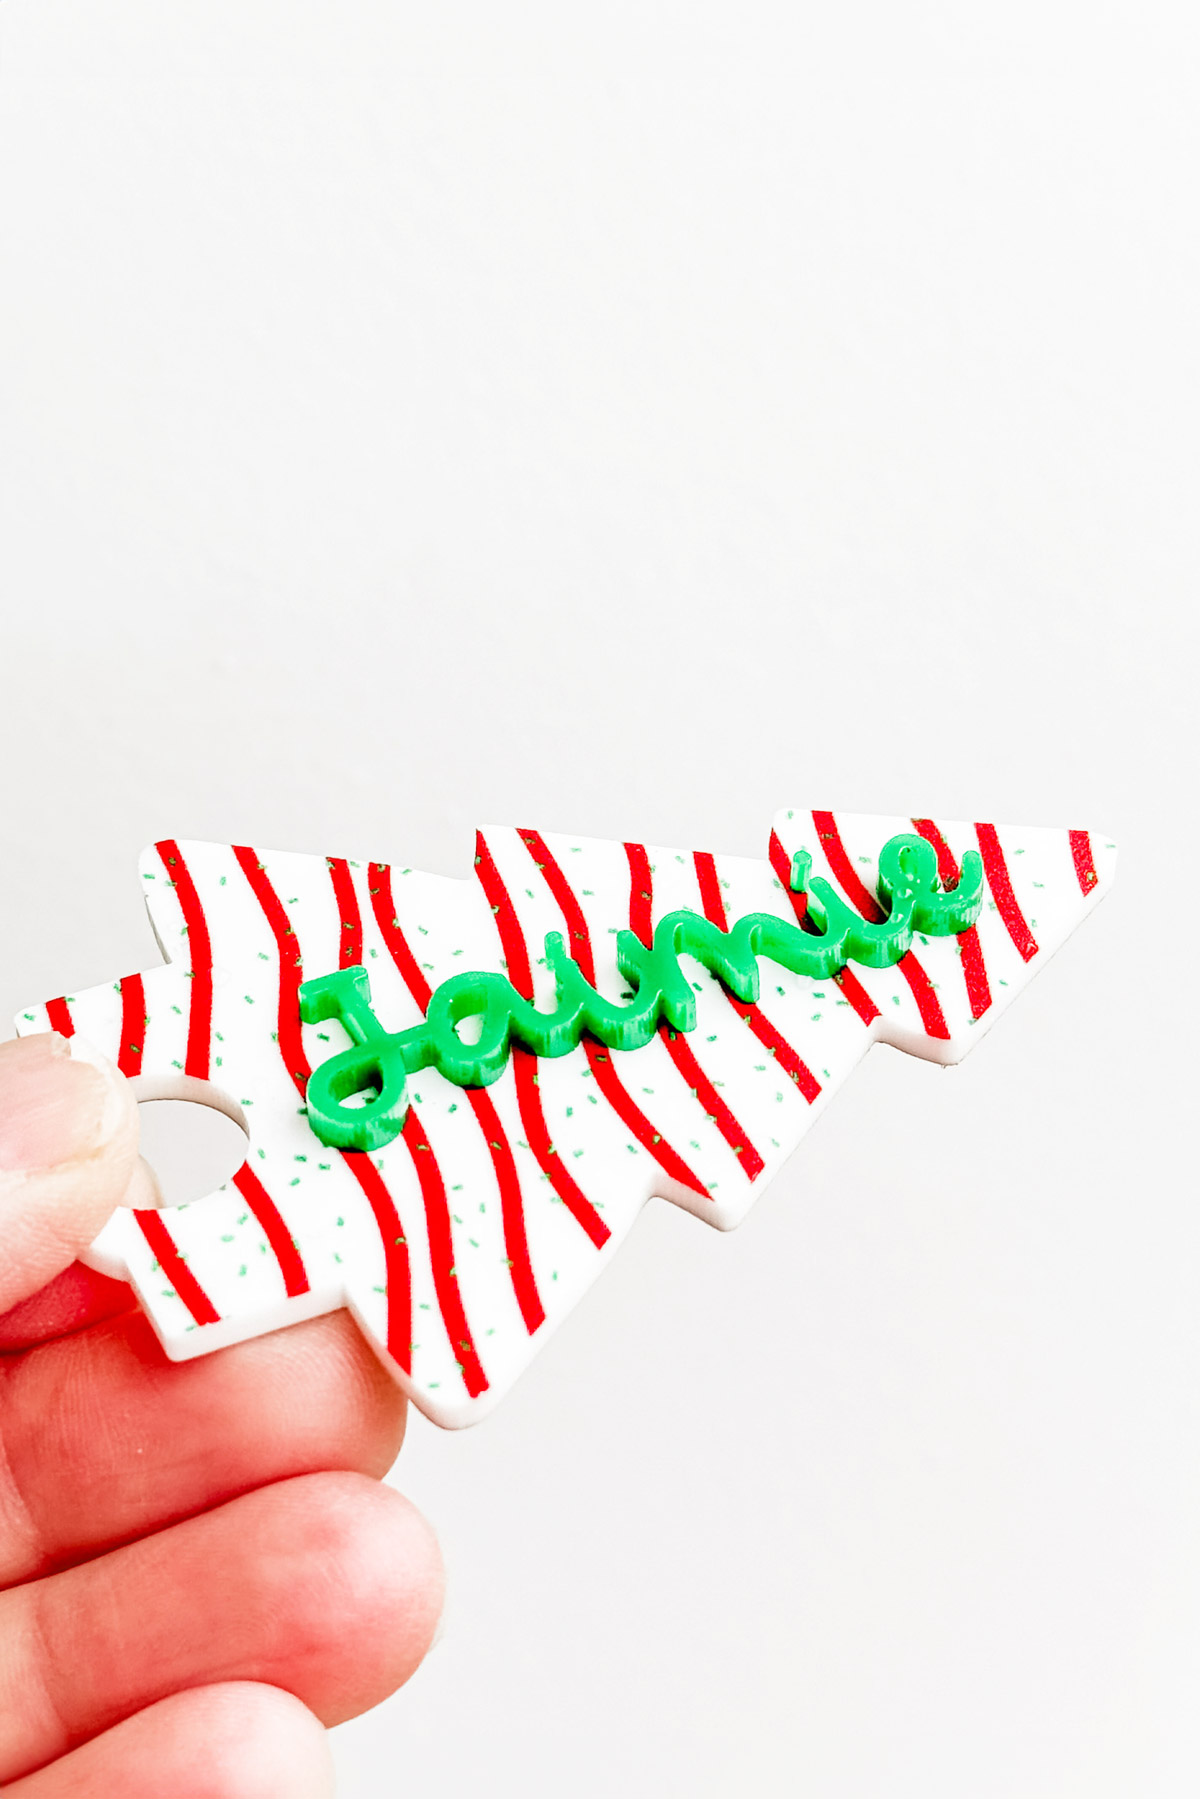 This is an image of the free Stanley Christmas tree cake topper you can get in this post.